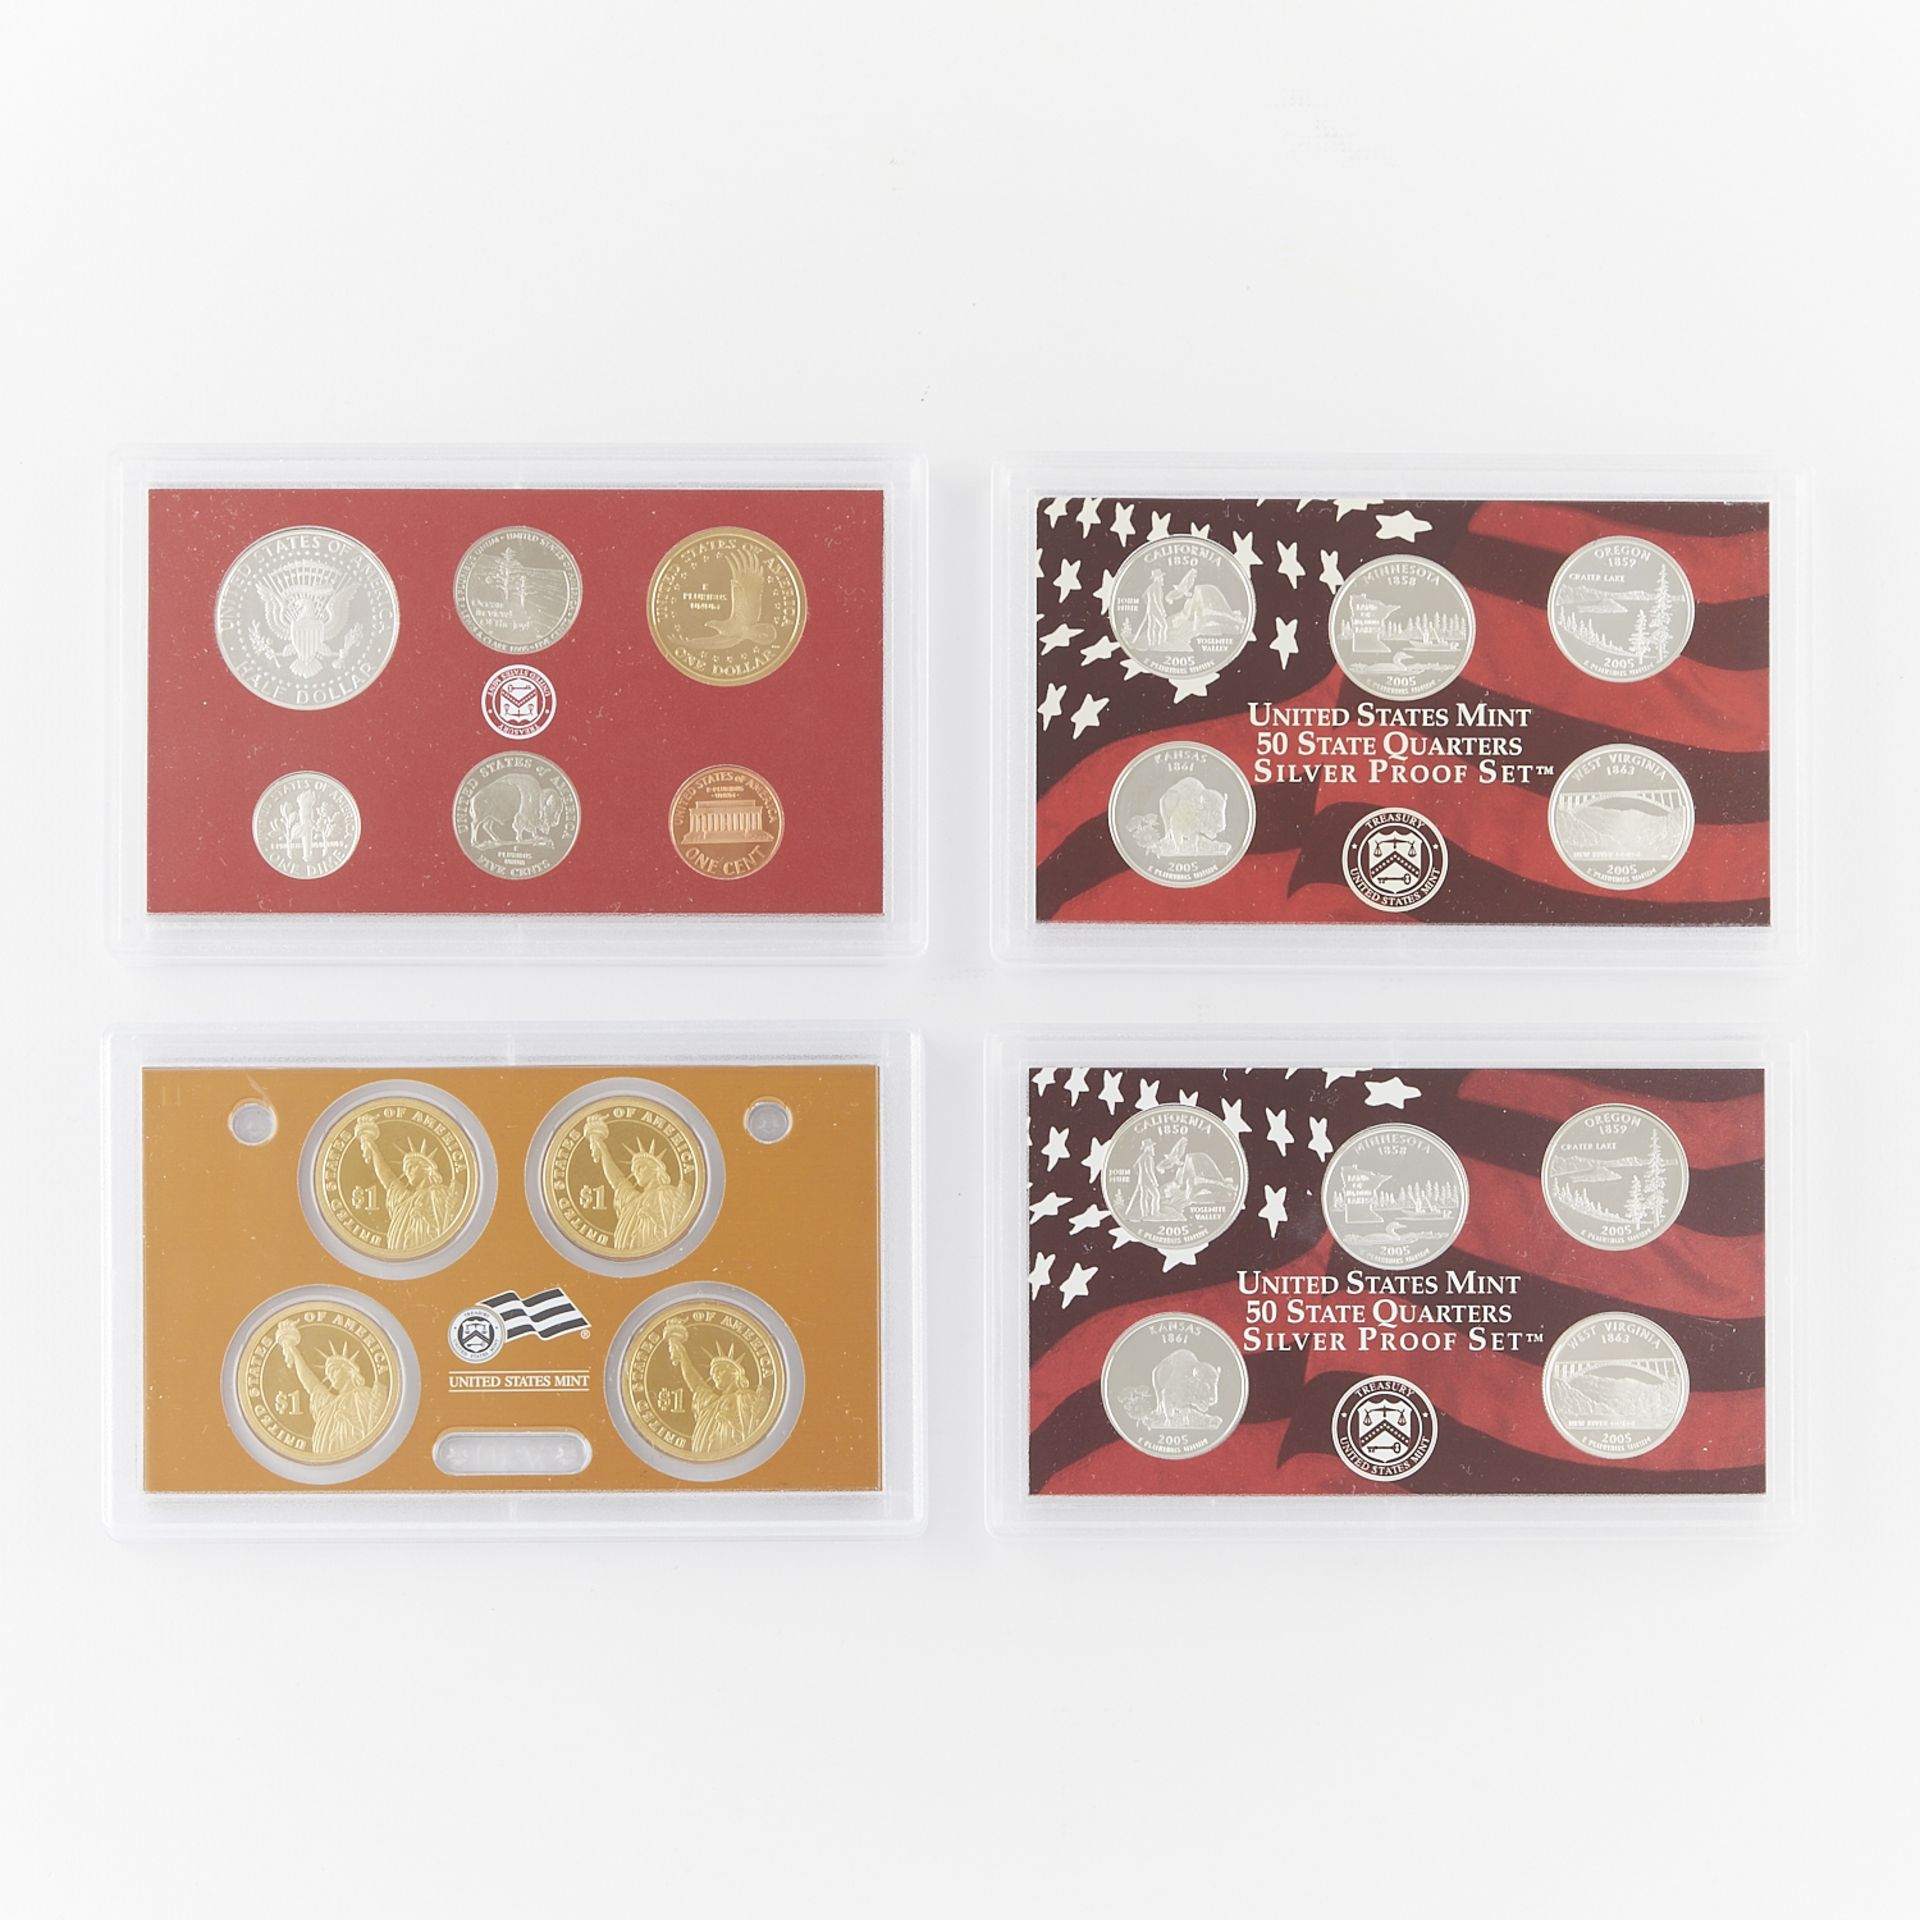 8 United States Silver Mint Proof Coin Sets - Image 3 of 3